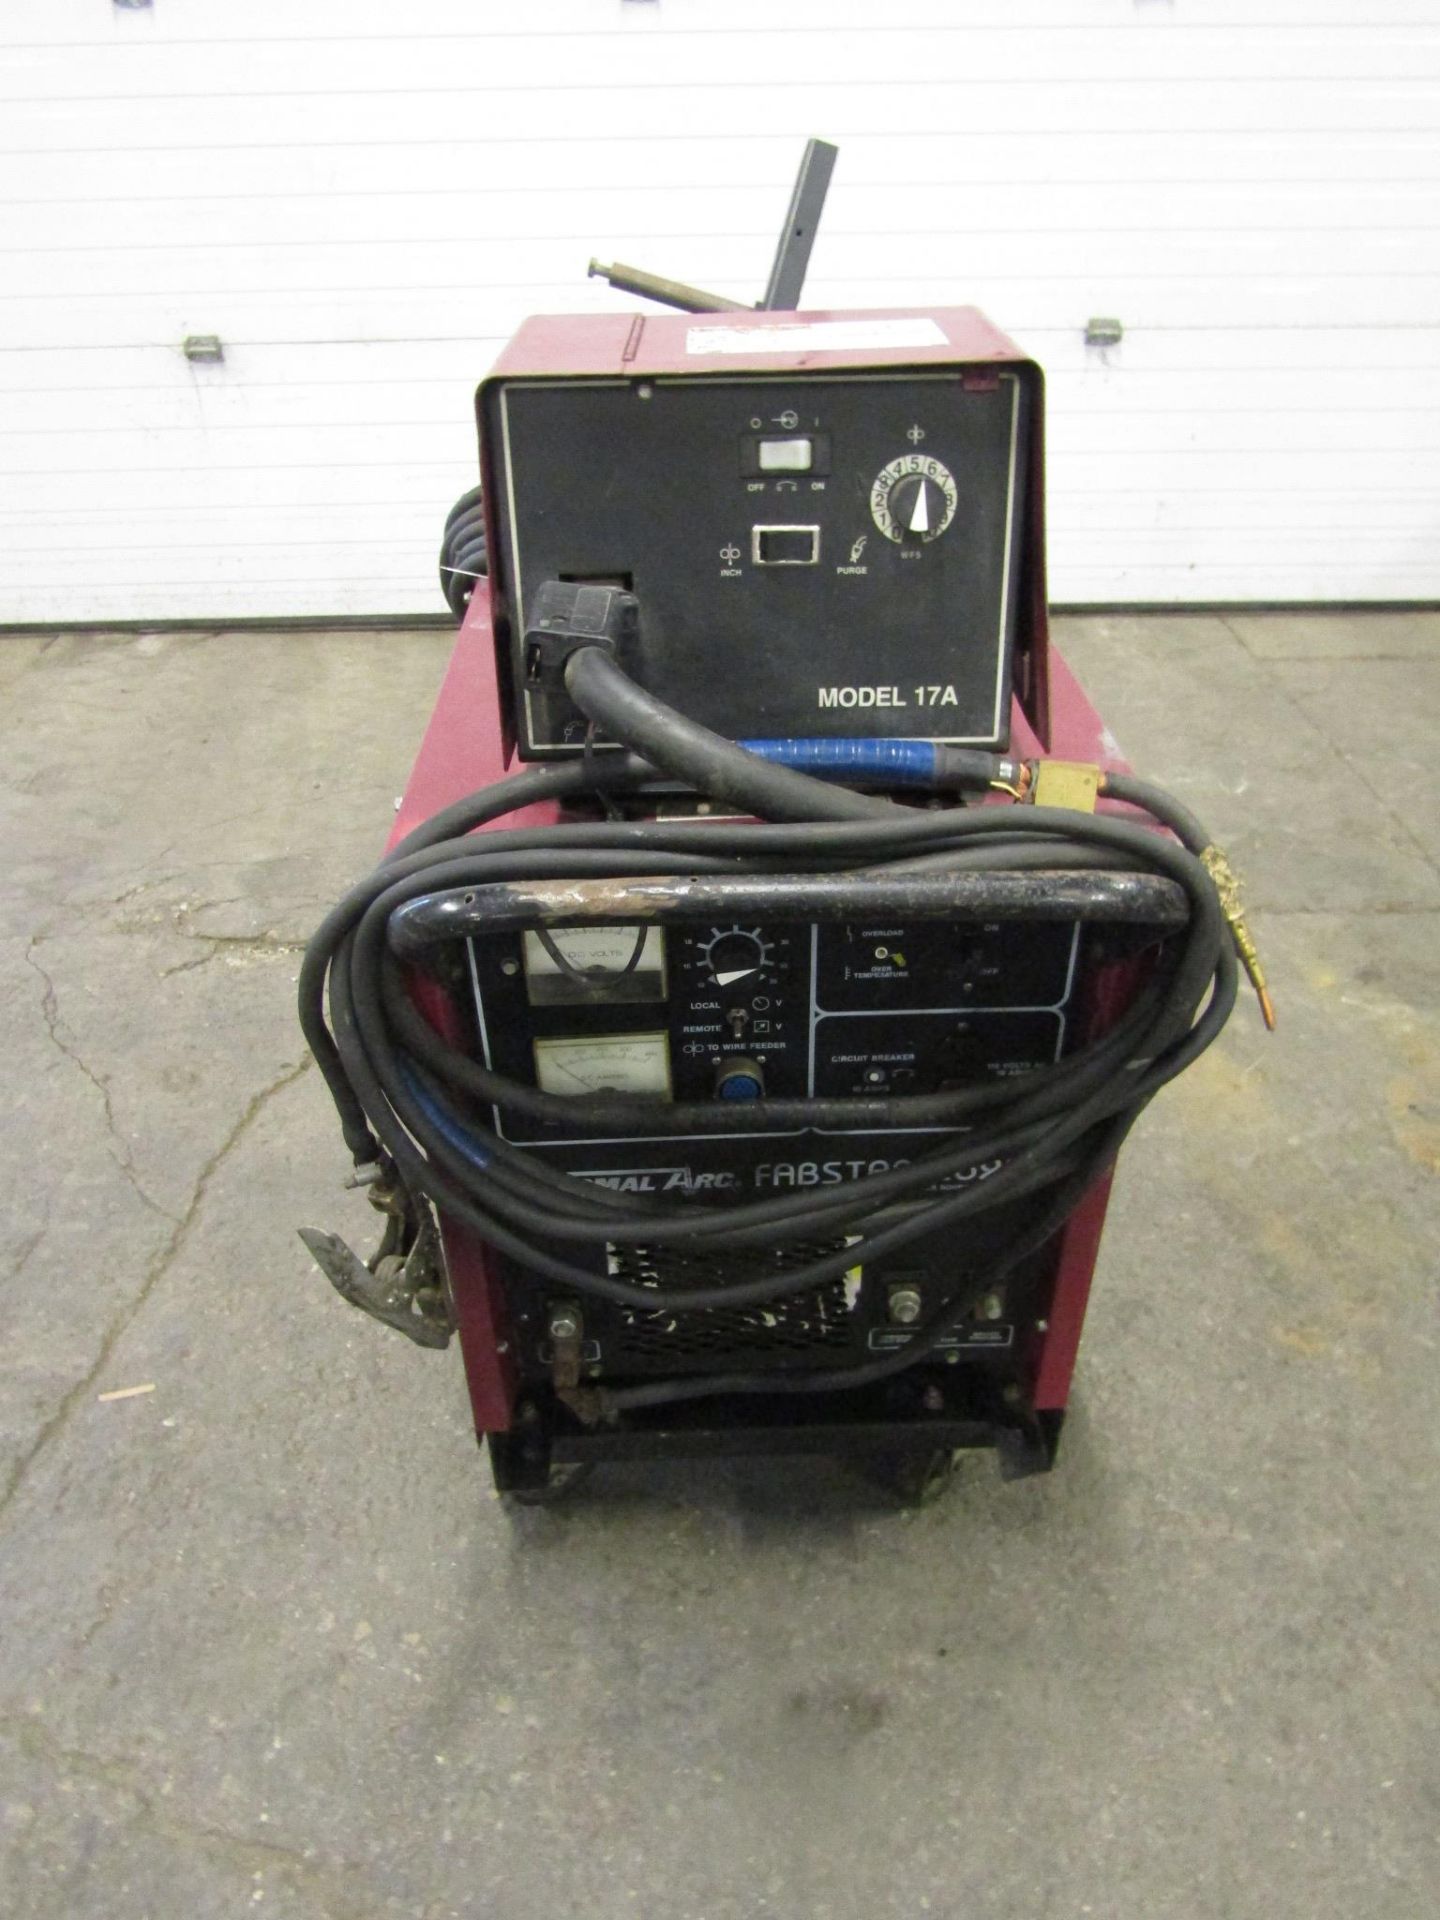 Thermal Arc Fabstar 2620 Mig welder with 17A Welding wire feeder and mig gun - 230/460/575V 3